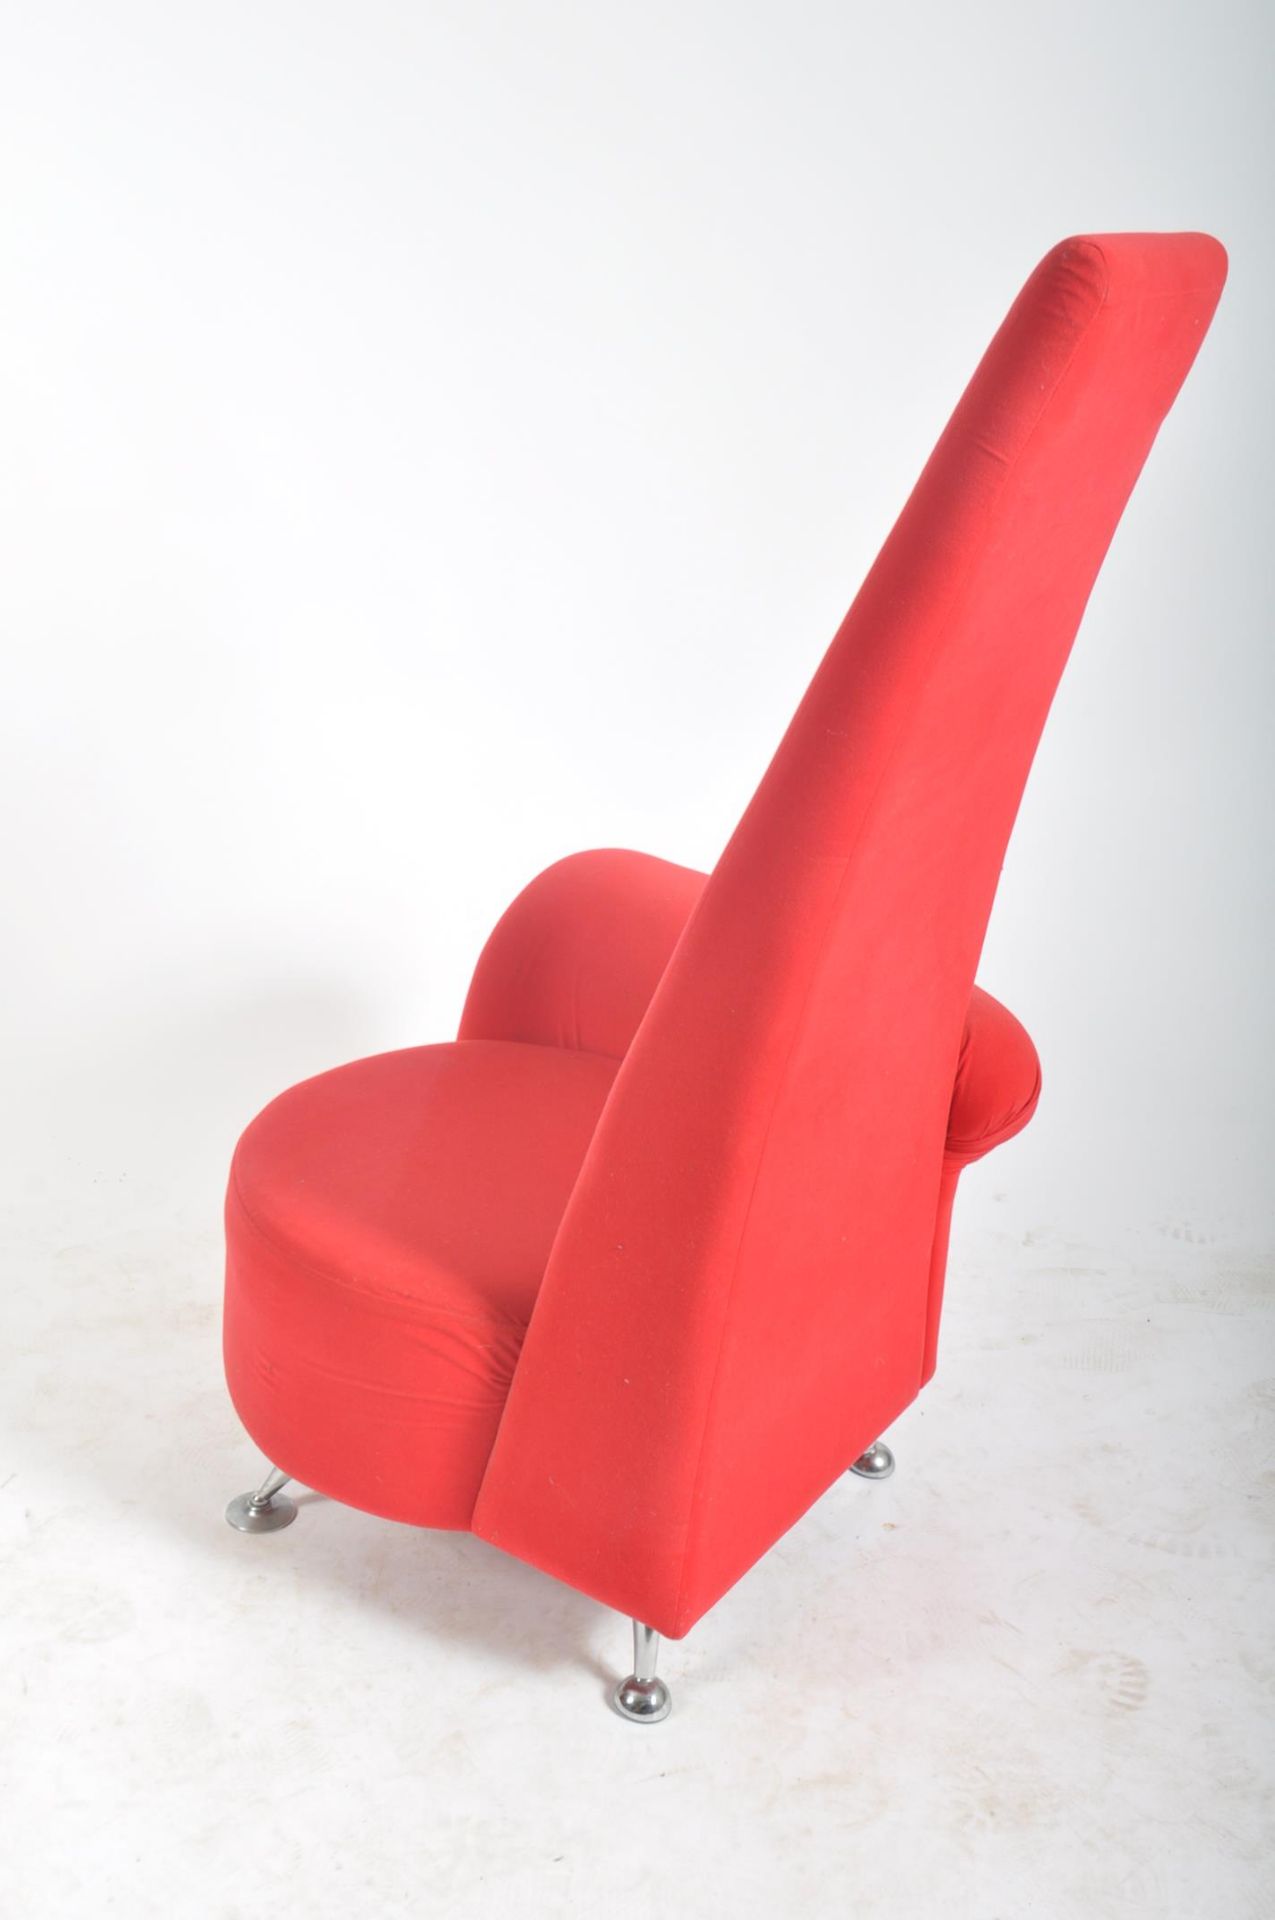 POTENZA CHAIR - CONTEMPORARY HIGH BACK ARMCHAIR - Image 5 of 7